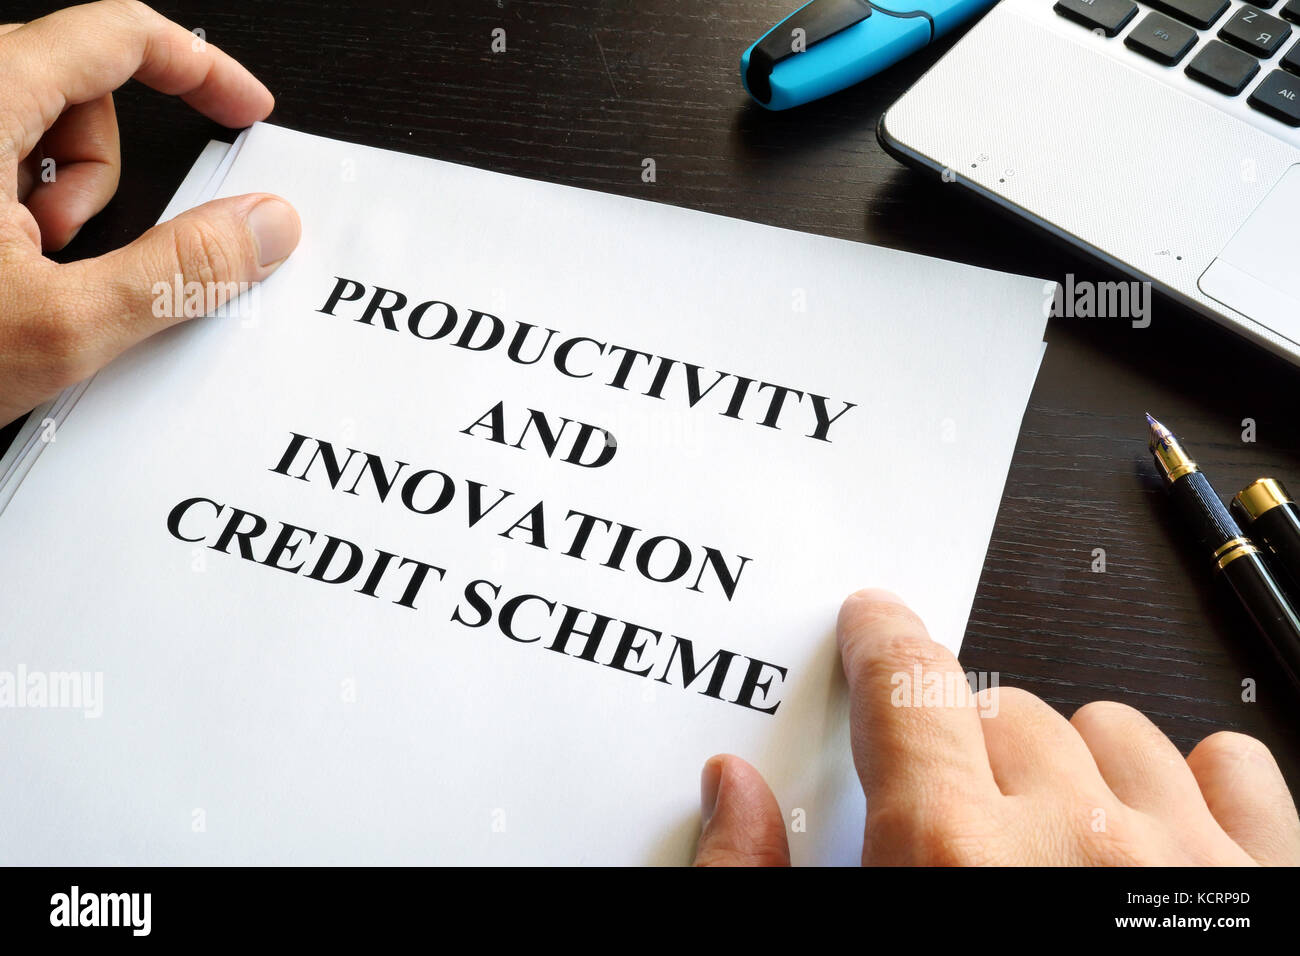 Papers with Productivity and Innovation Credit Scheme (PIC) Stock Photo